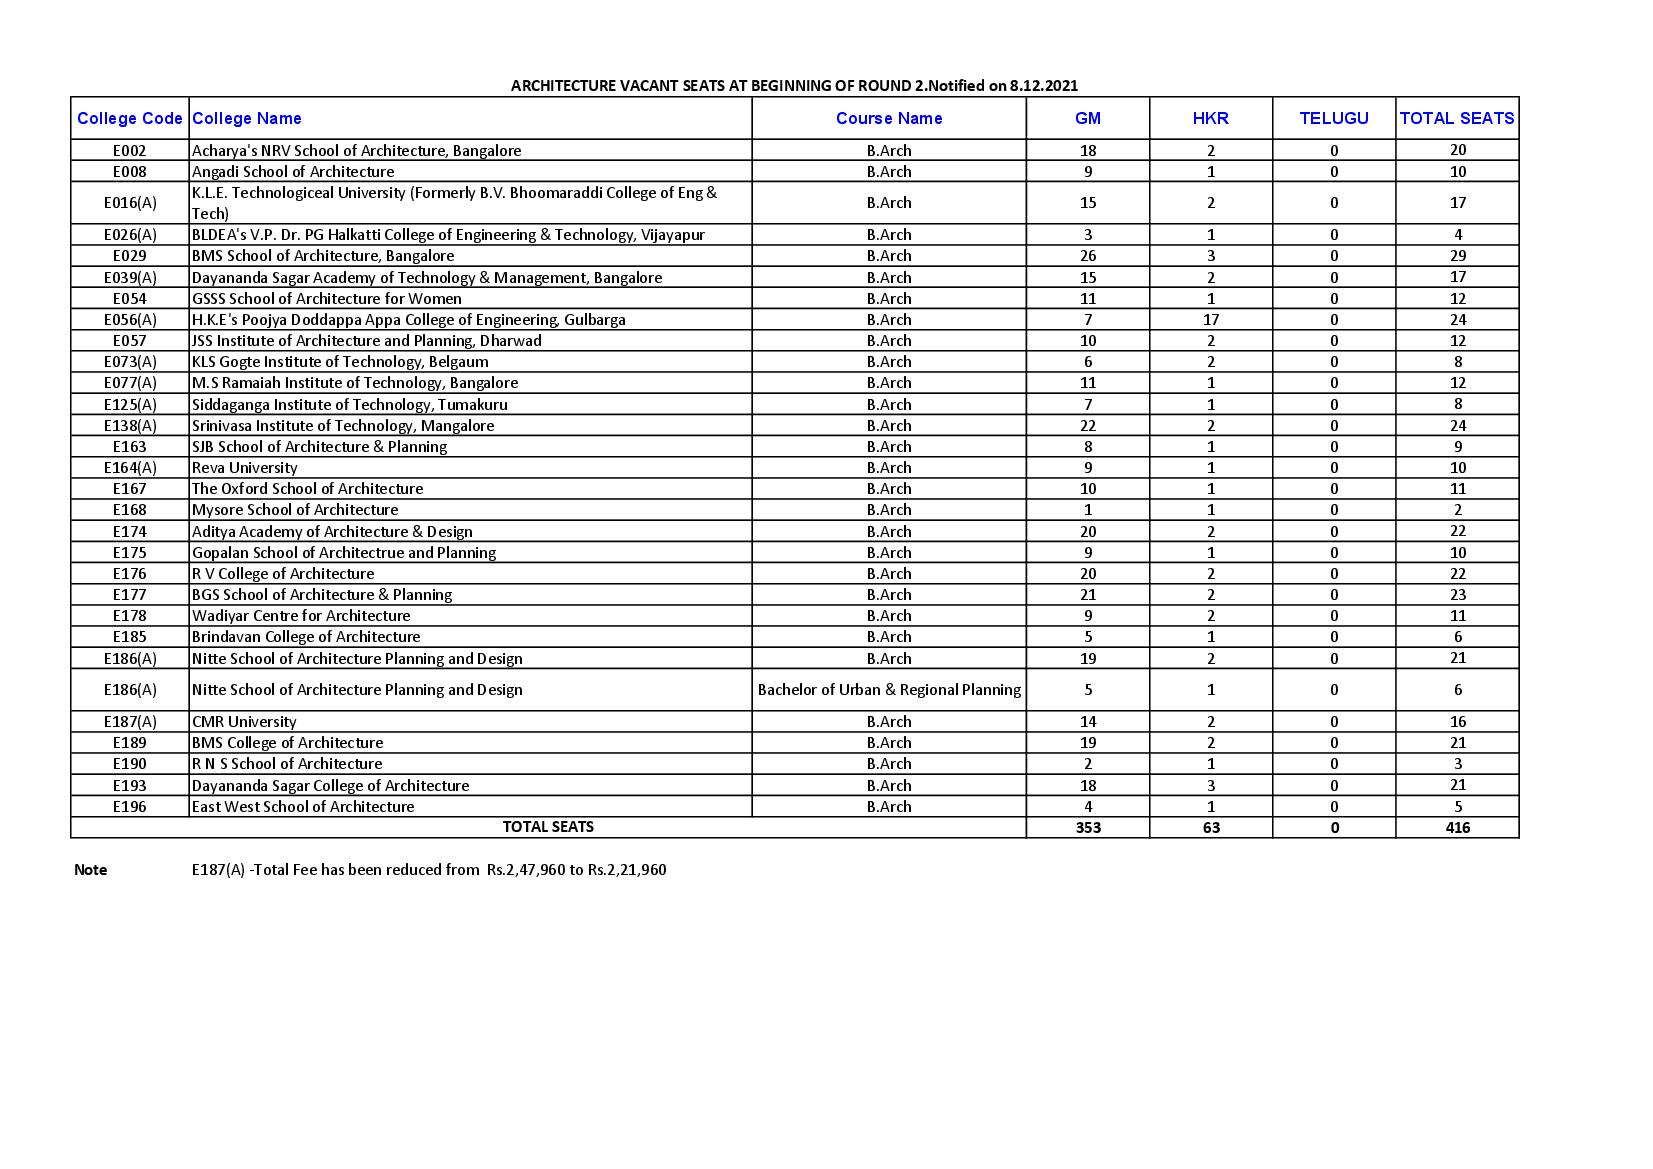 COMEDK UGET 2021 Architecture Vacant seats at beginning of Round 2 - Page 1